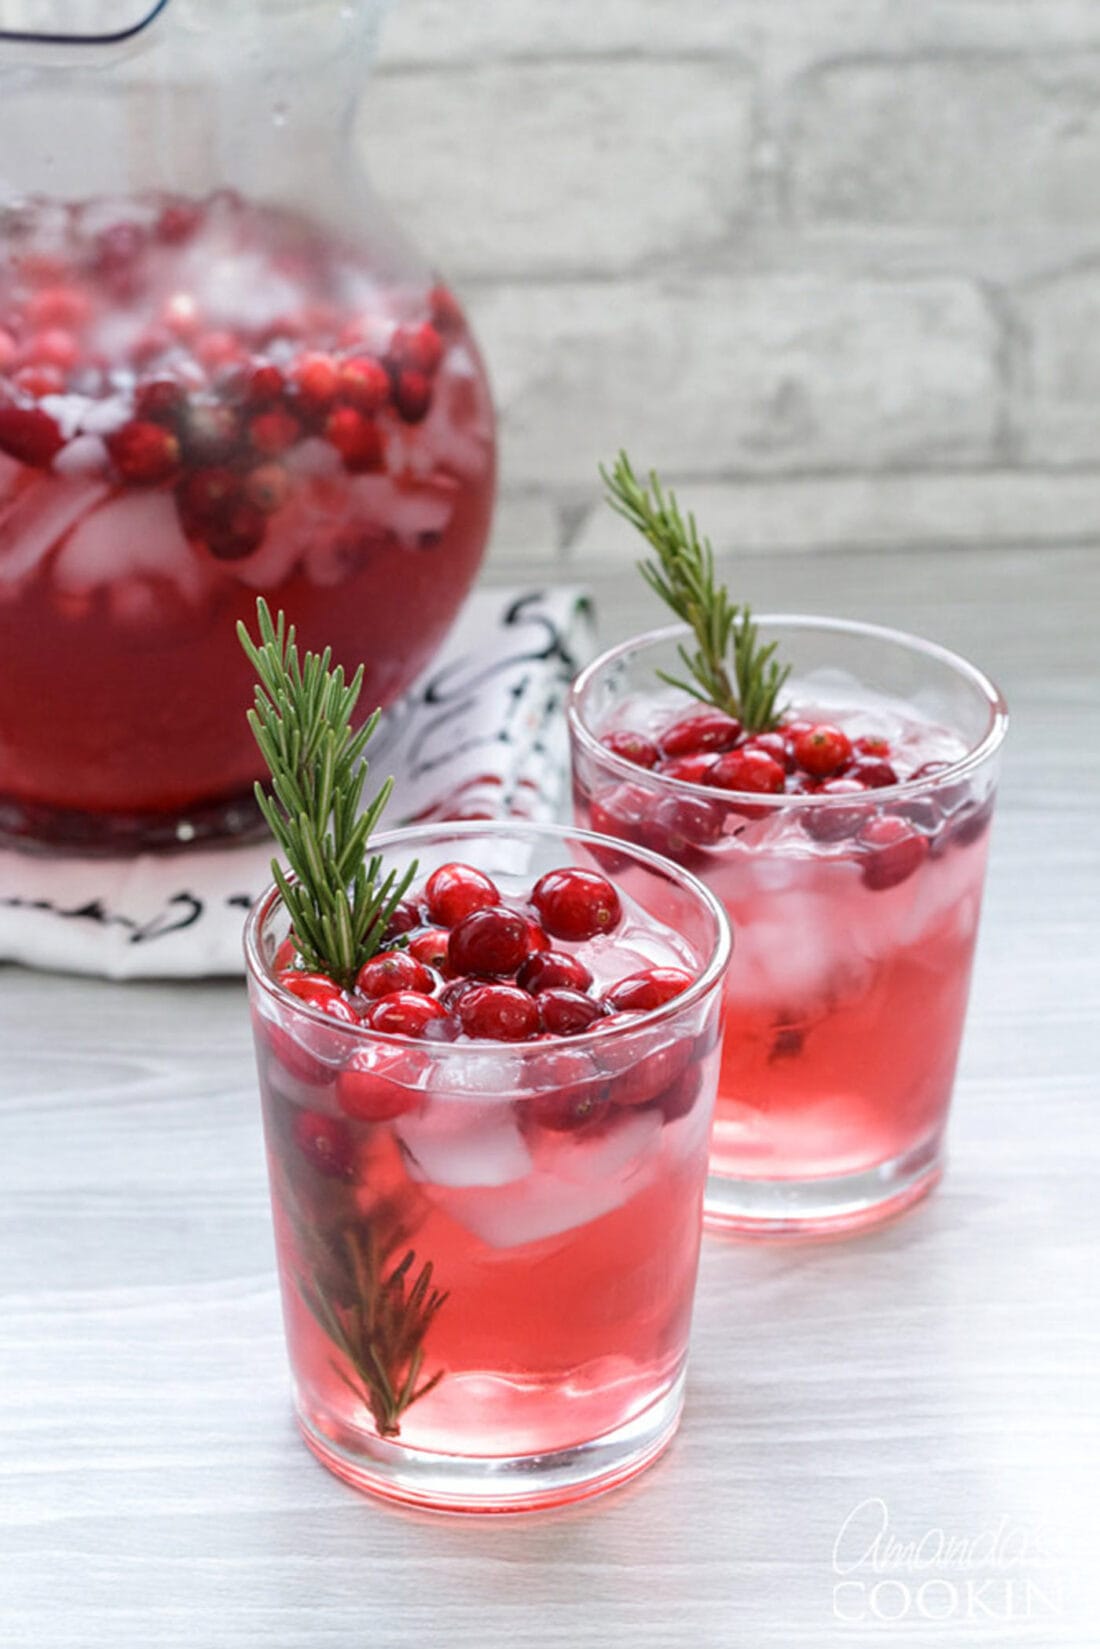 cranberry holiday punch with rosemary sprigs as garnish